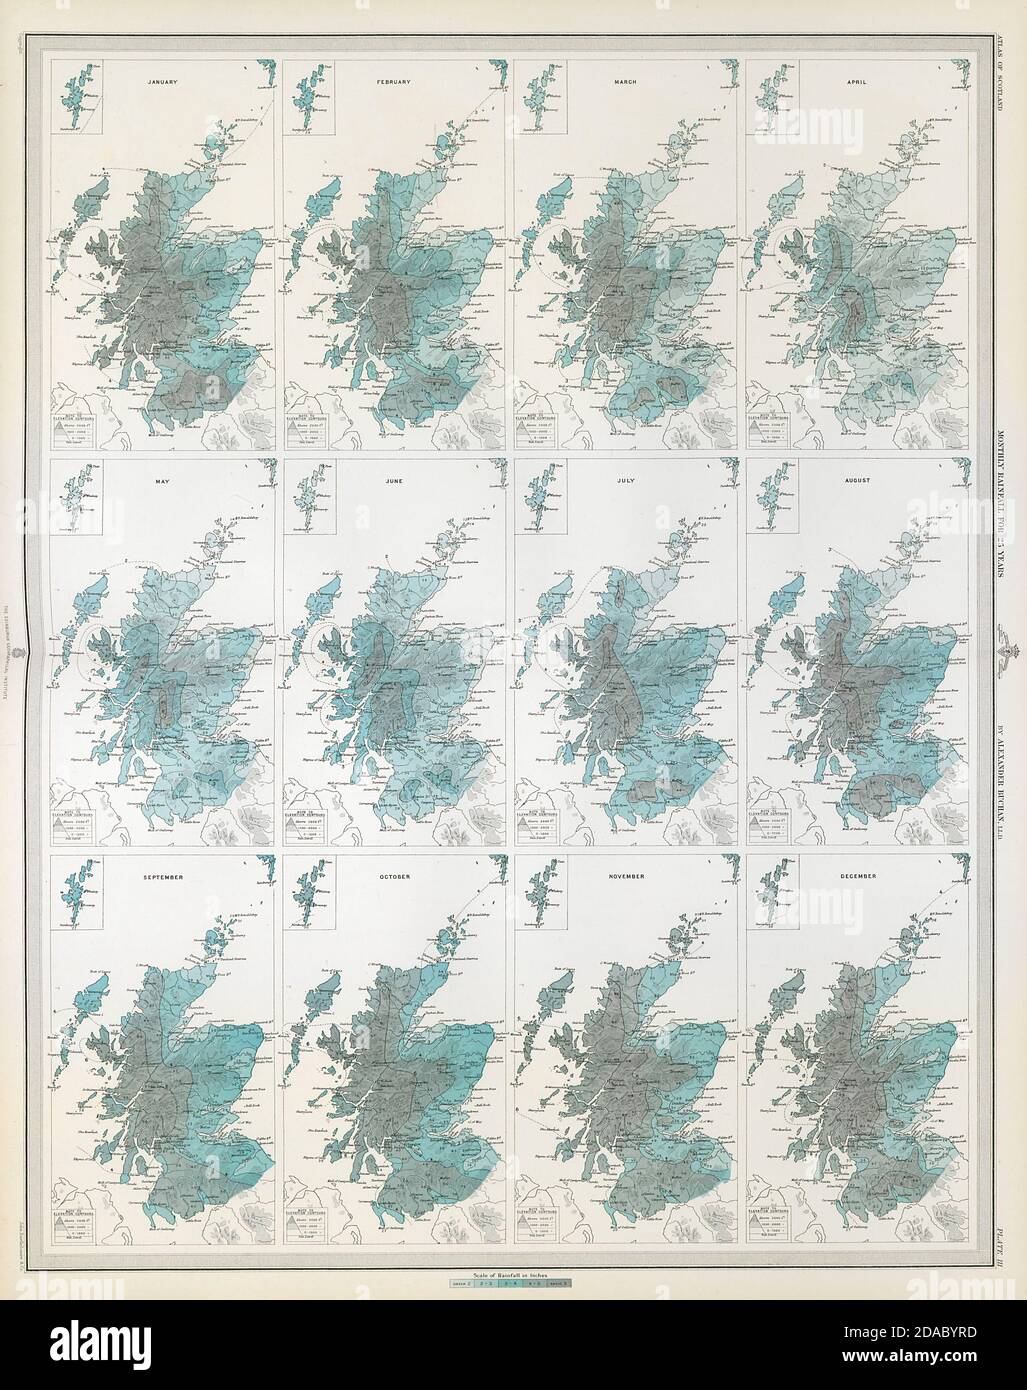 SCOTLAND average monthly rainfall for 25 years by Alexander Buchan 1895 map Stock Photo